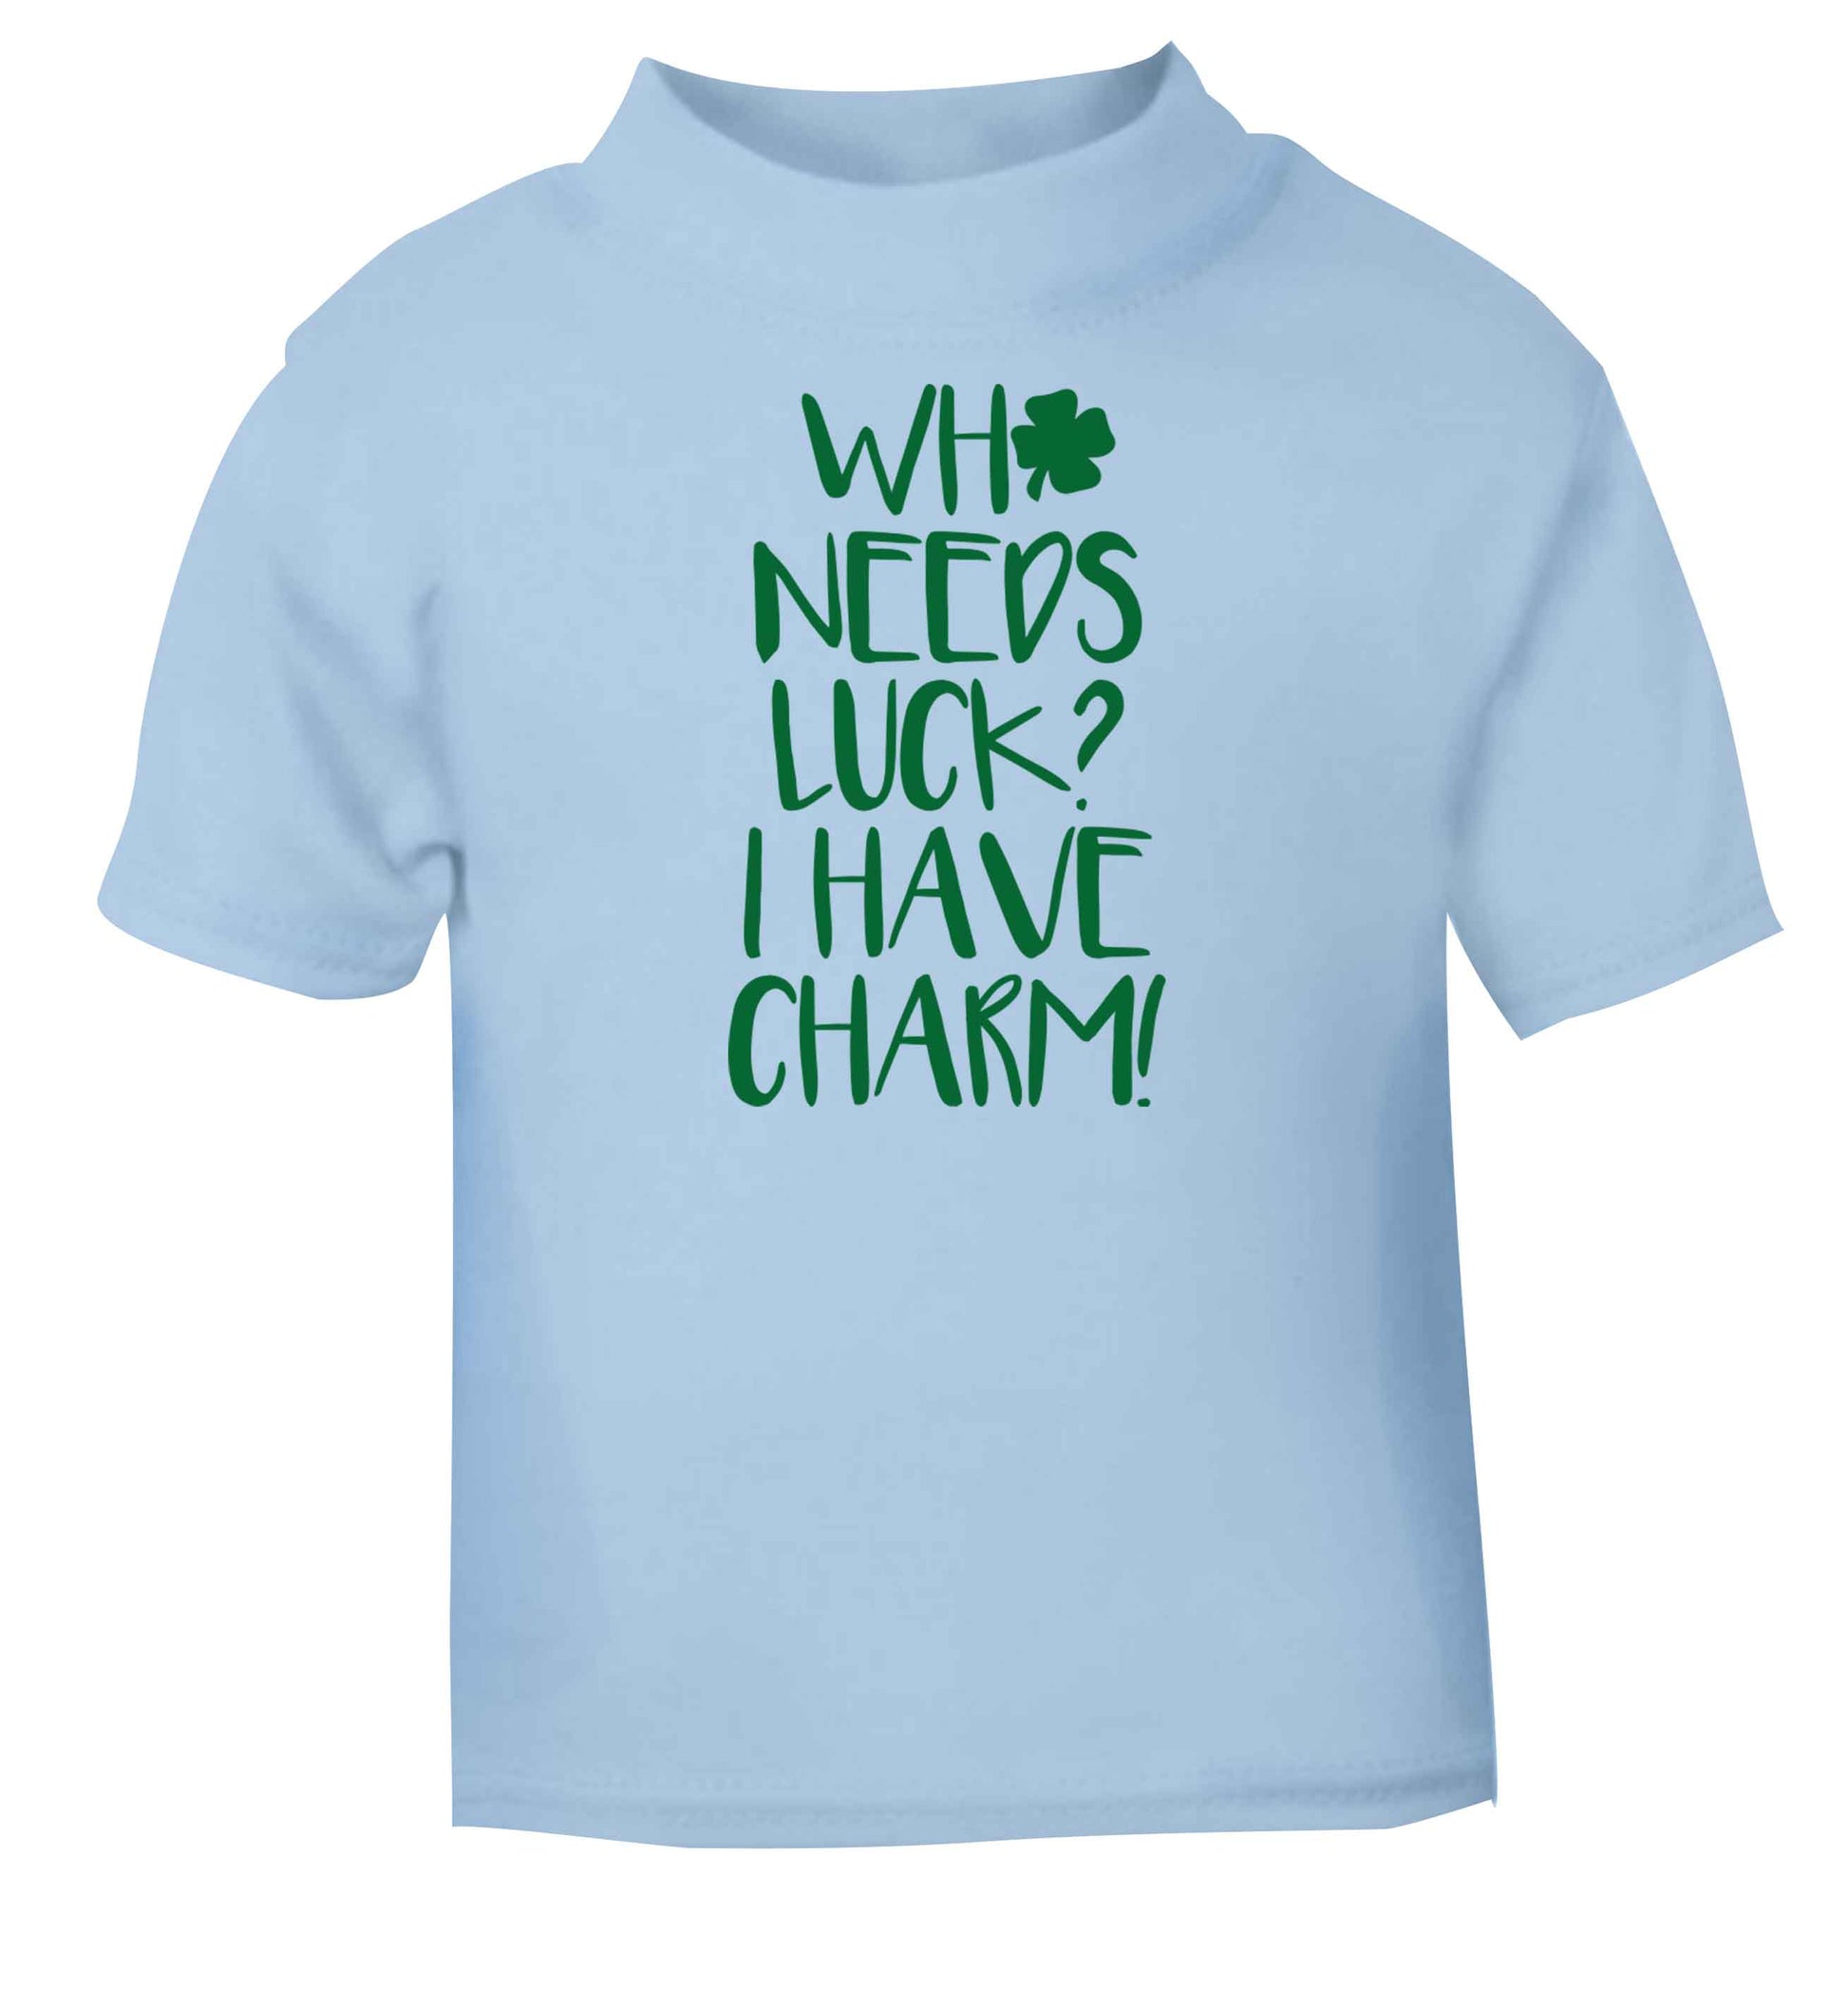 Who needs luck? I have charm! light blue baby toddler Tshirt 2 Years